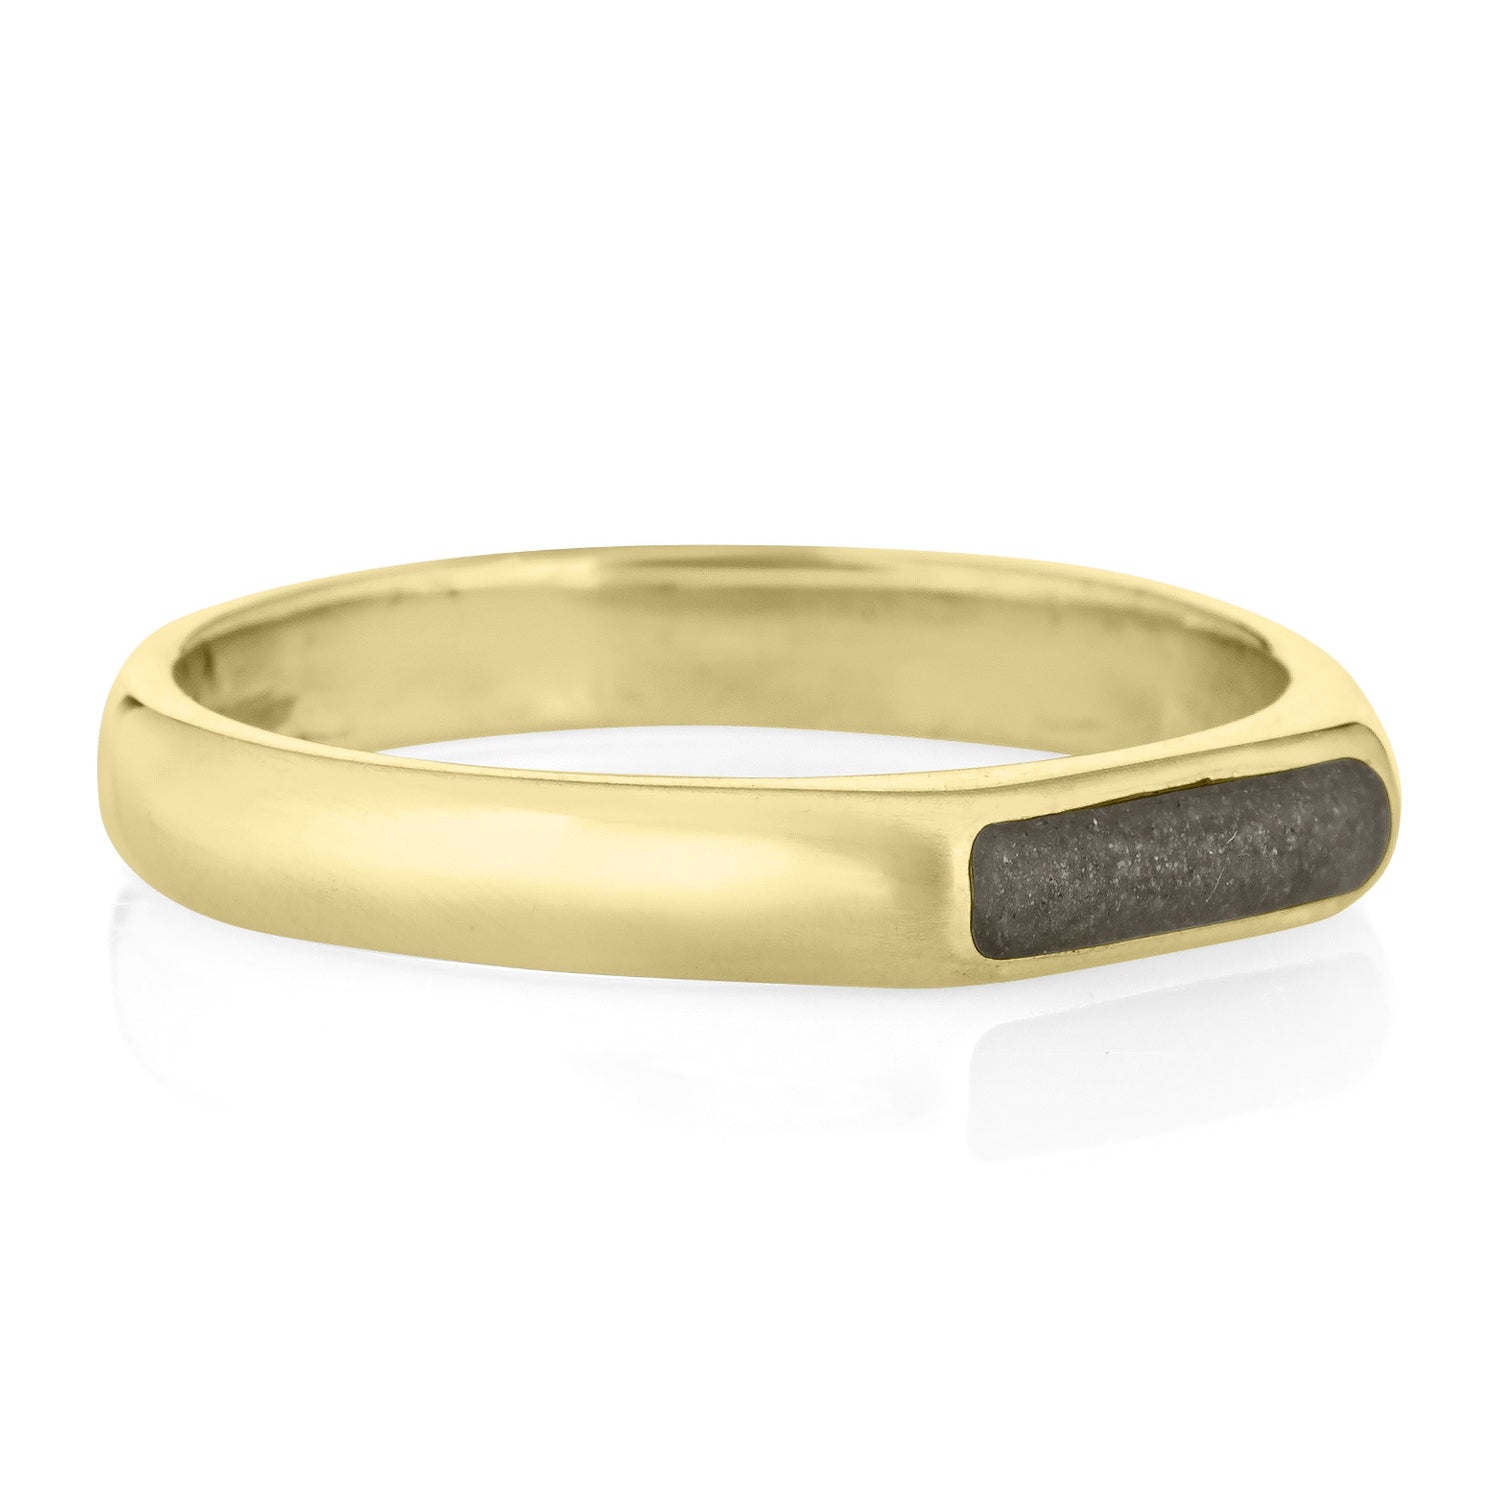 Men's Smooth Band Cremation Ring in 14K Yellow Gold – closebymejewelry